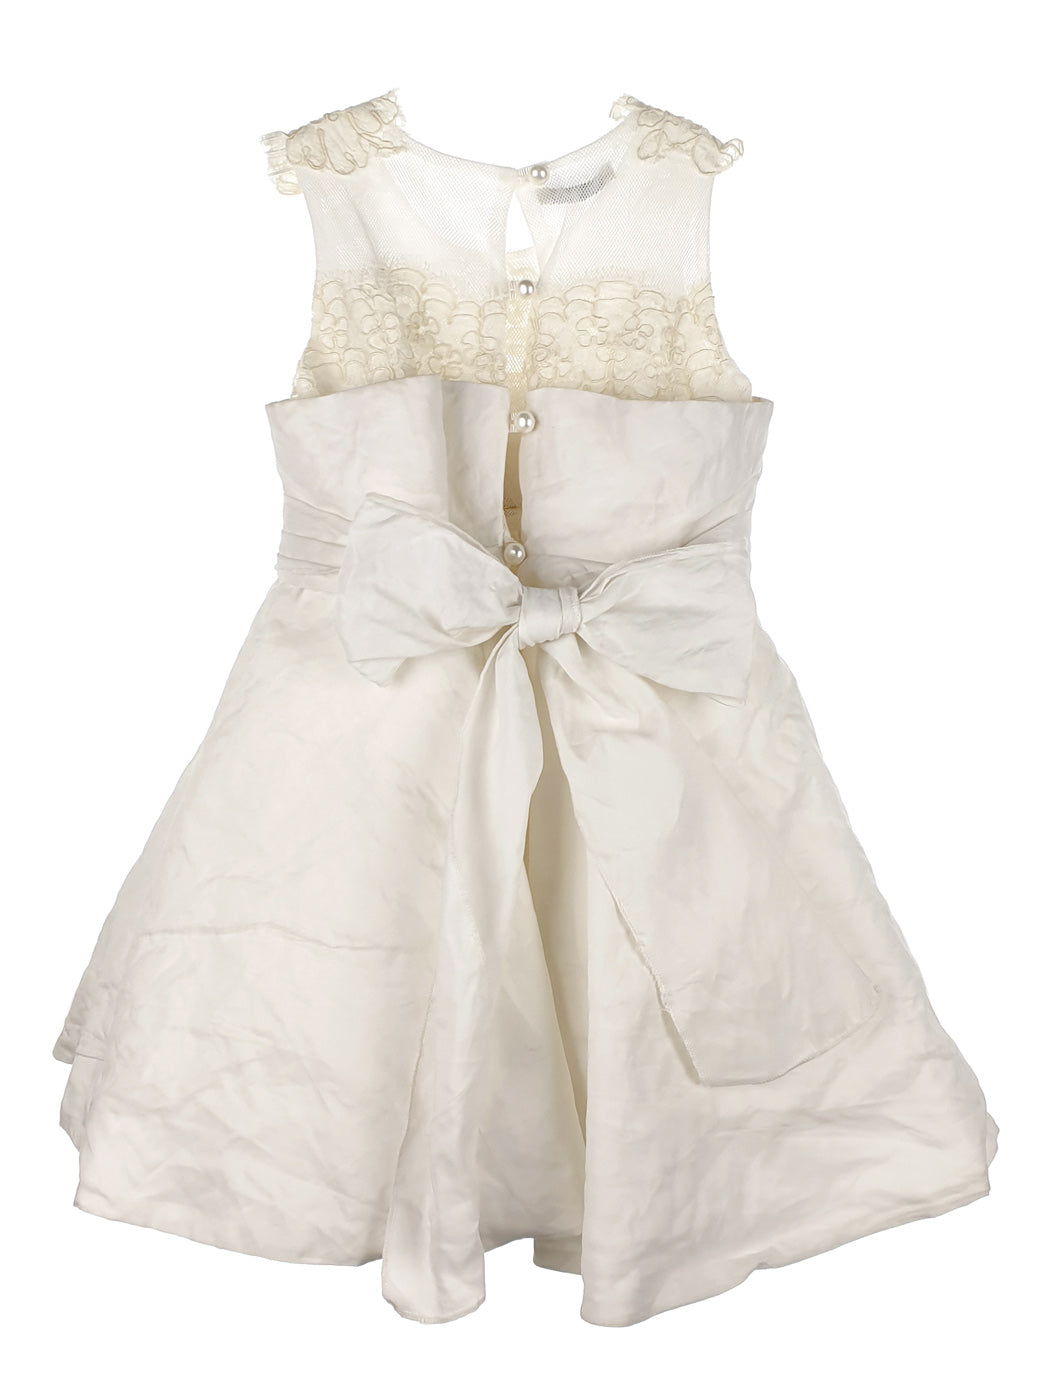 Baptism silk Dress with lace - MAY